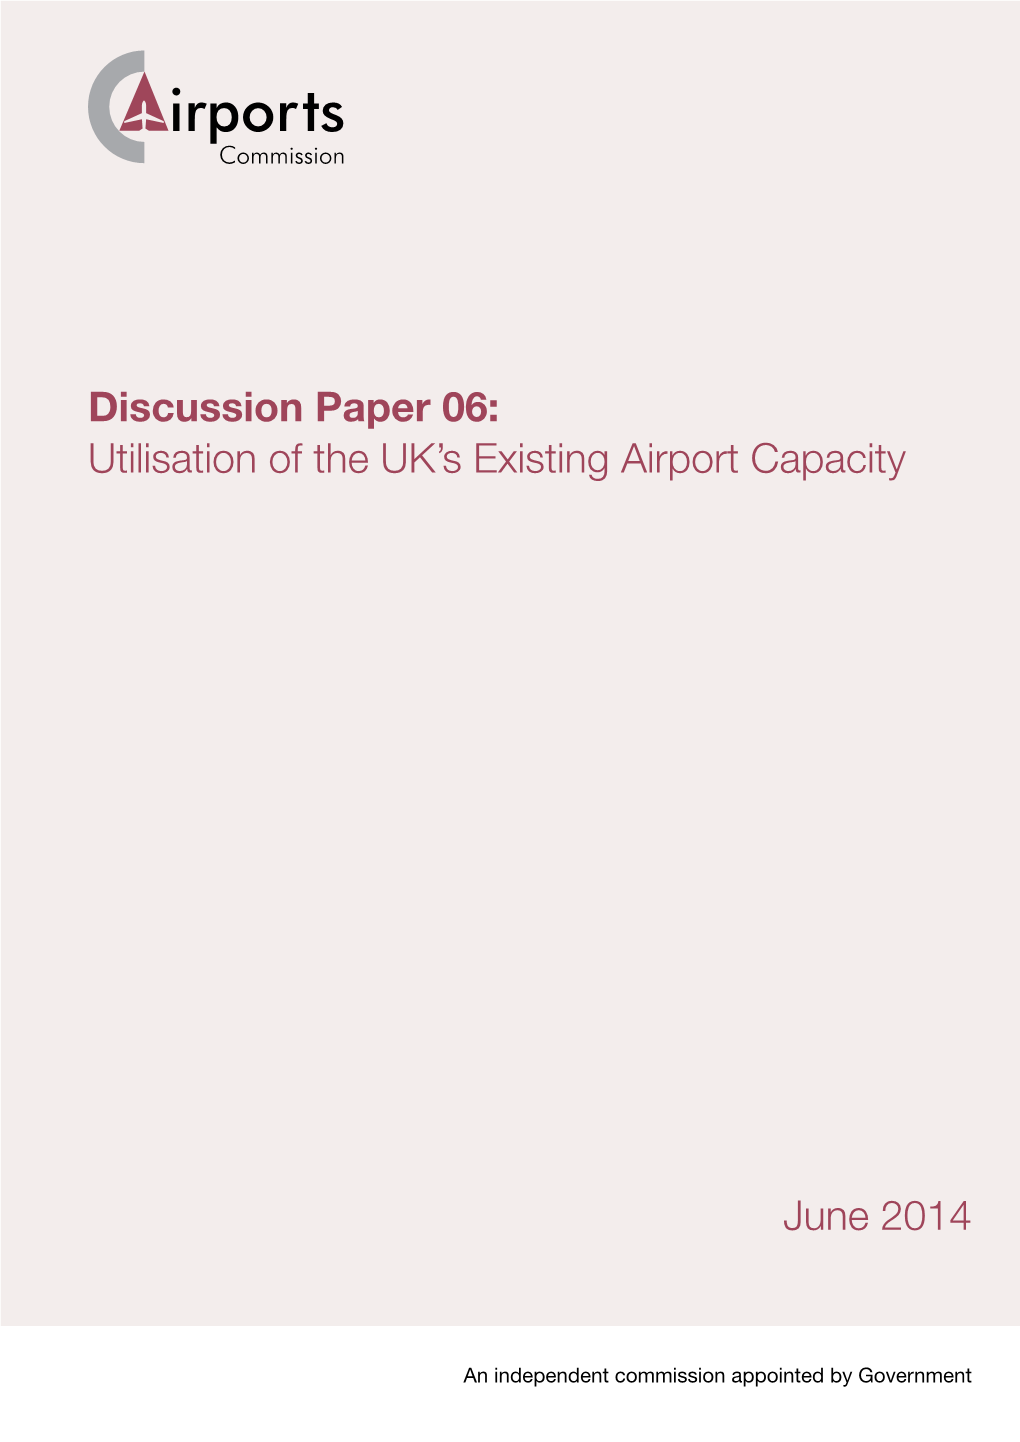 Utilisation of the UK's Existing Airport Capacity